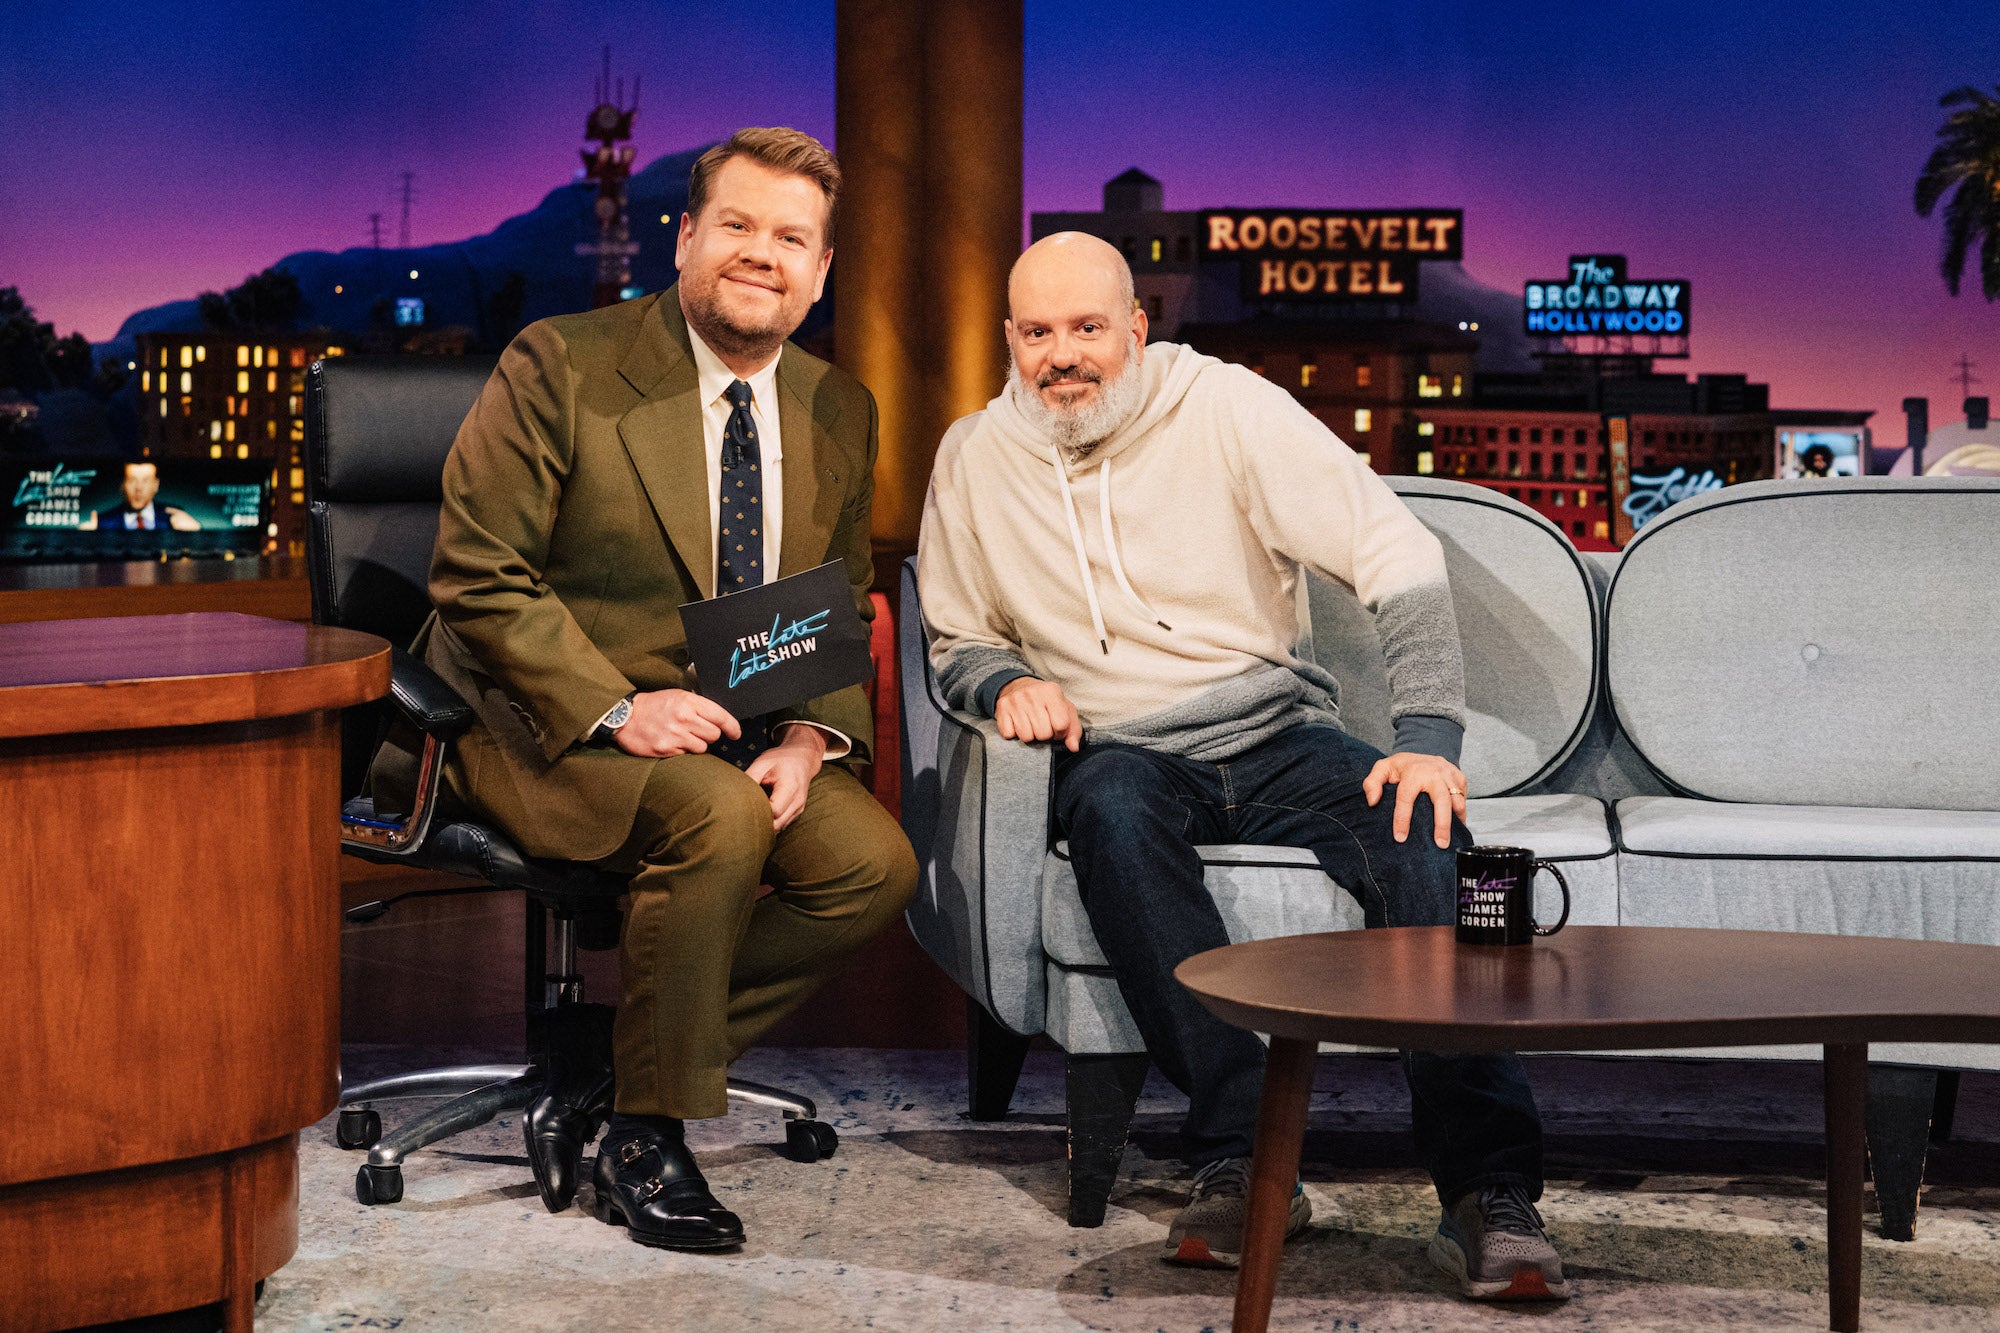 Me on The Late Late Show with James Corden (Jan. 27, 2022)